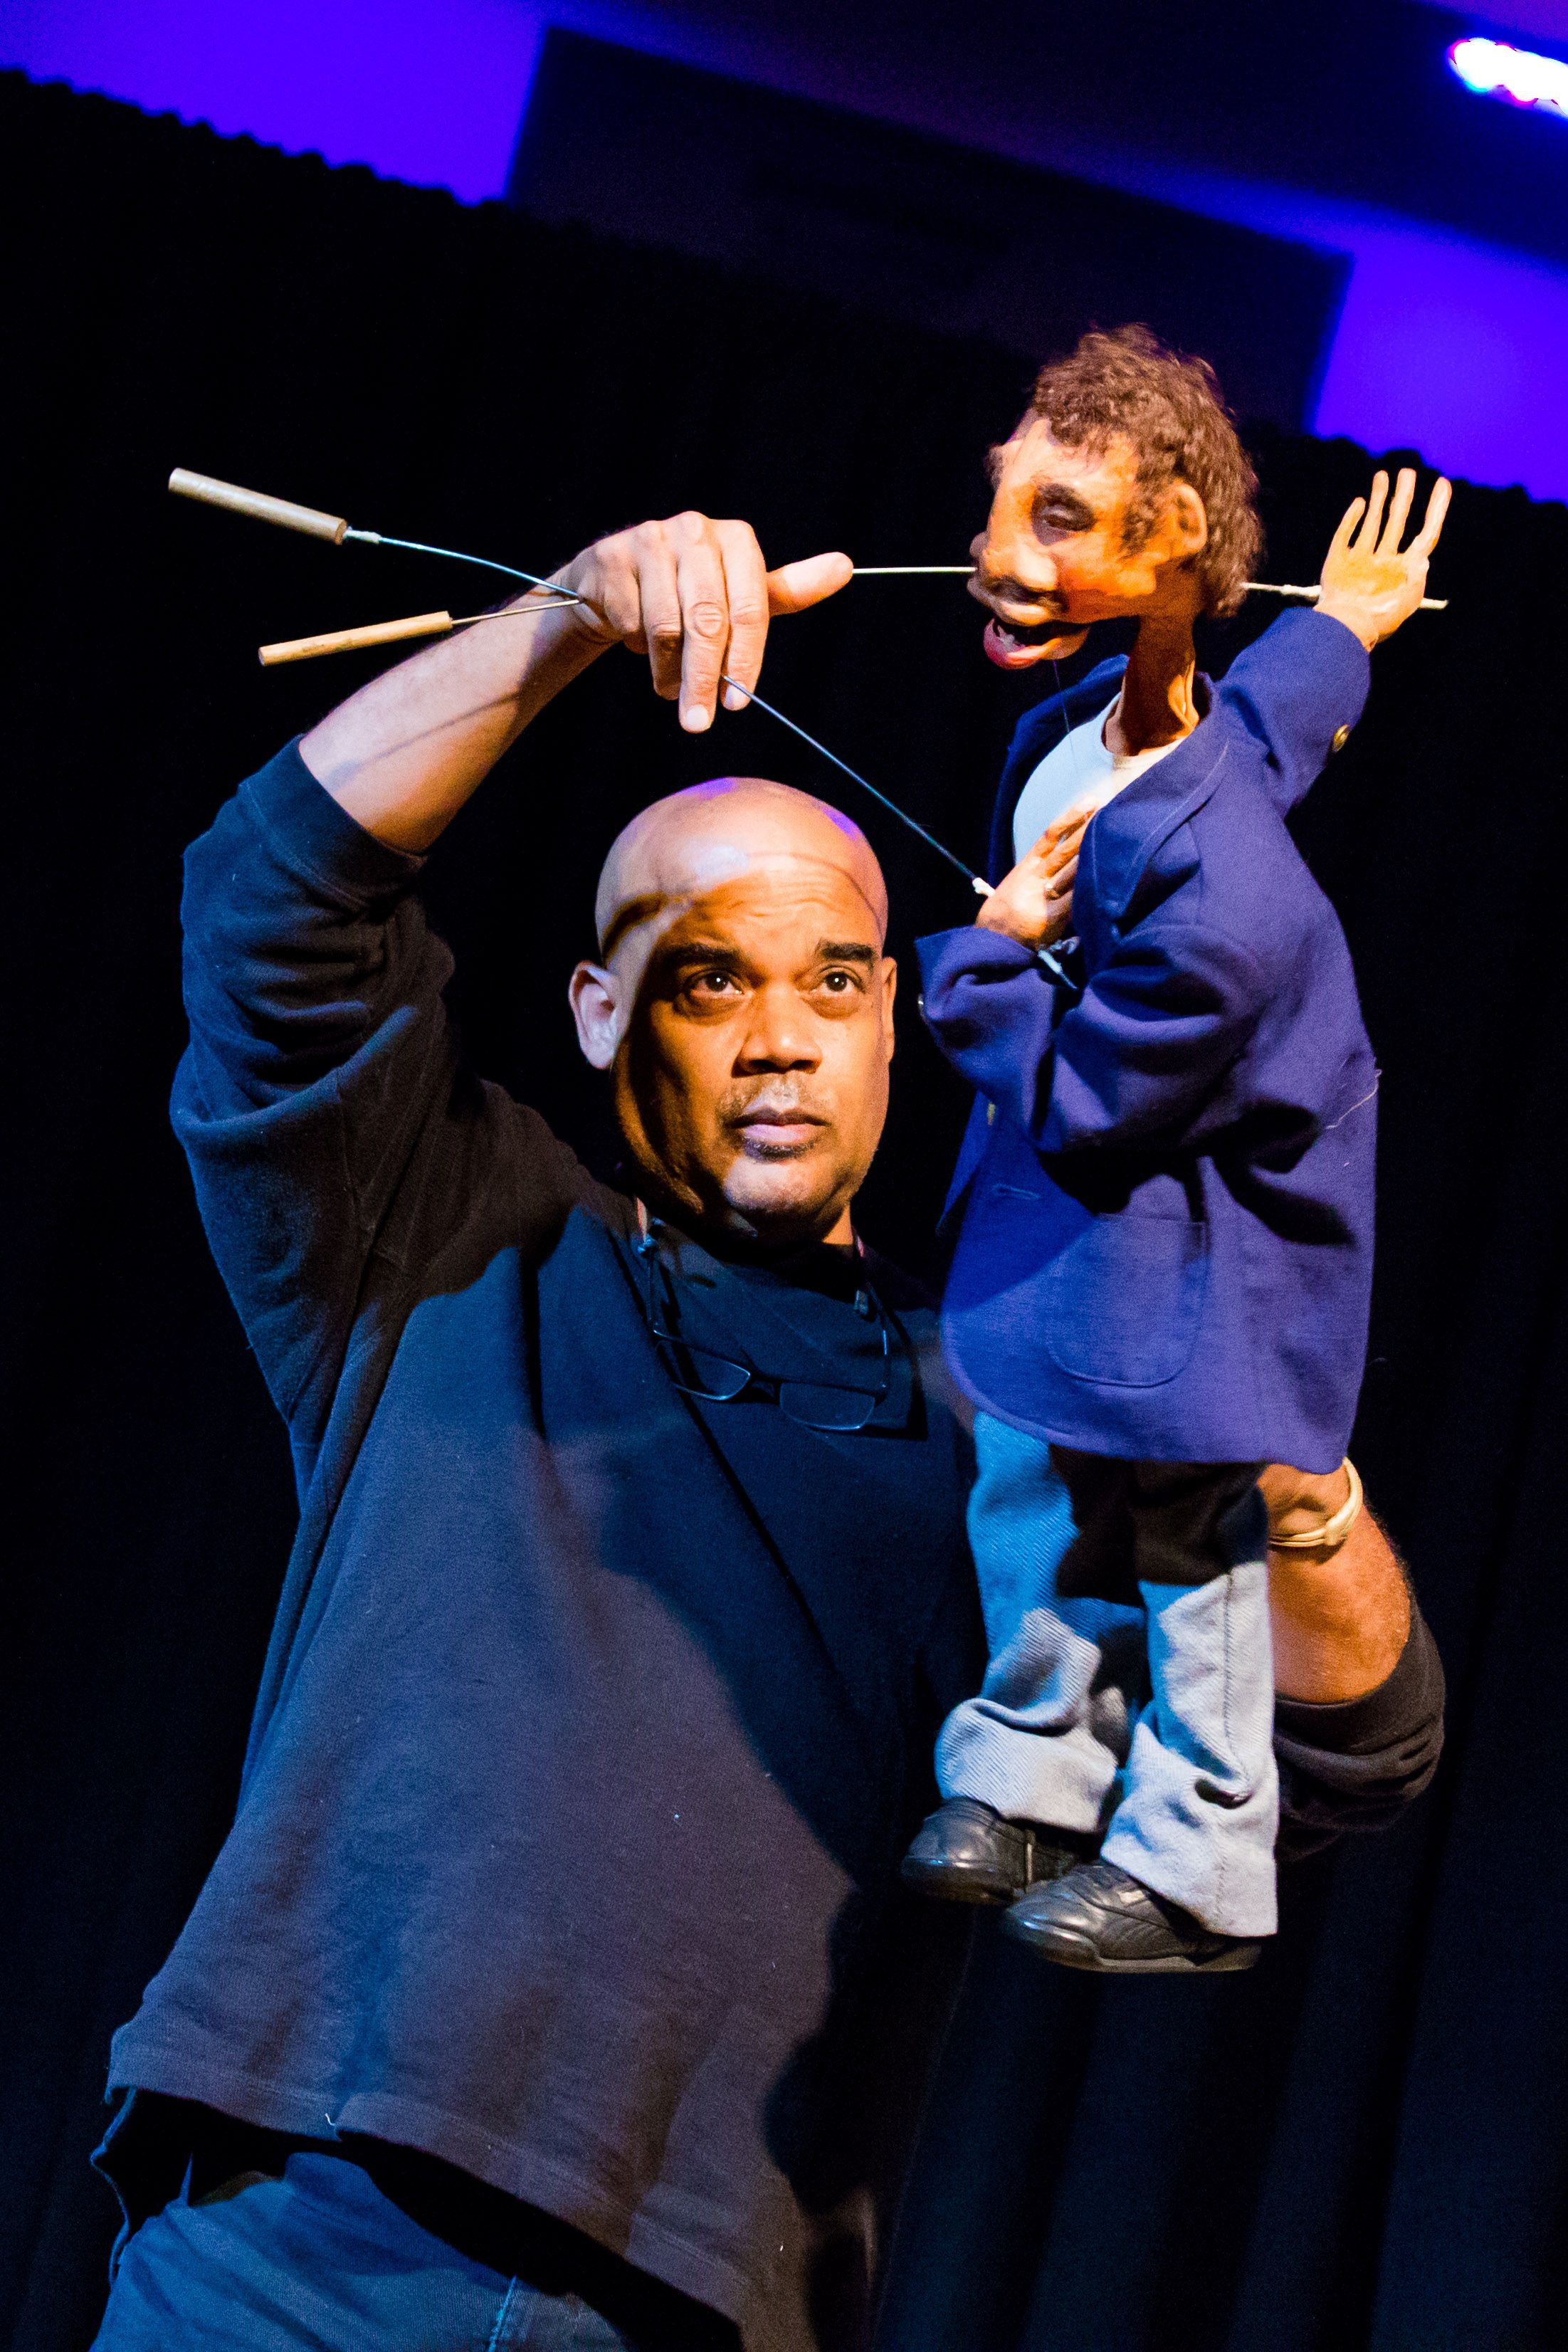 puppeteer manipulating puppet on stage